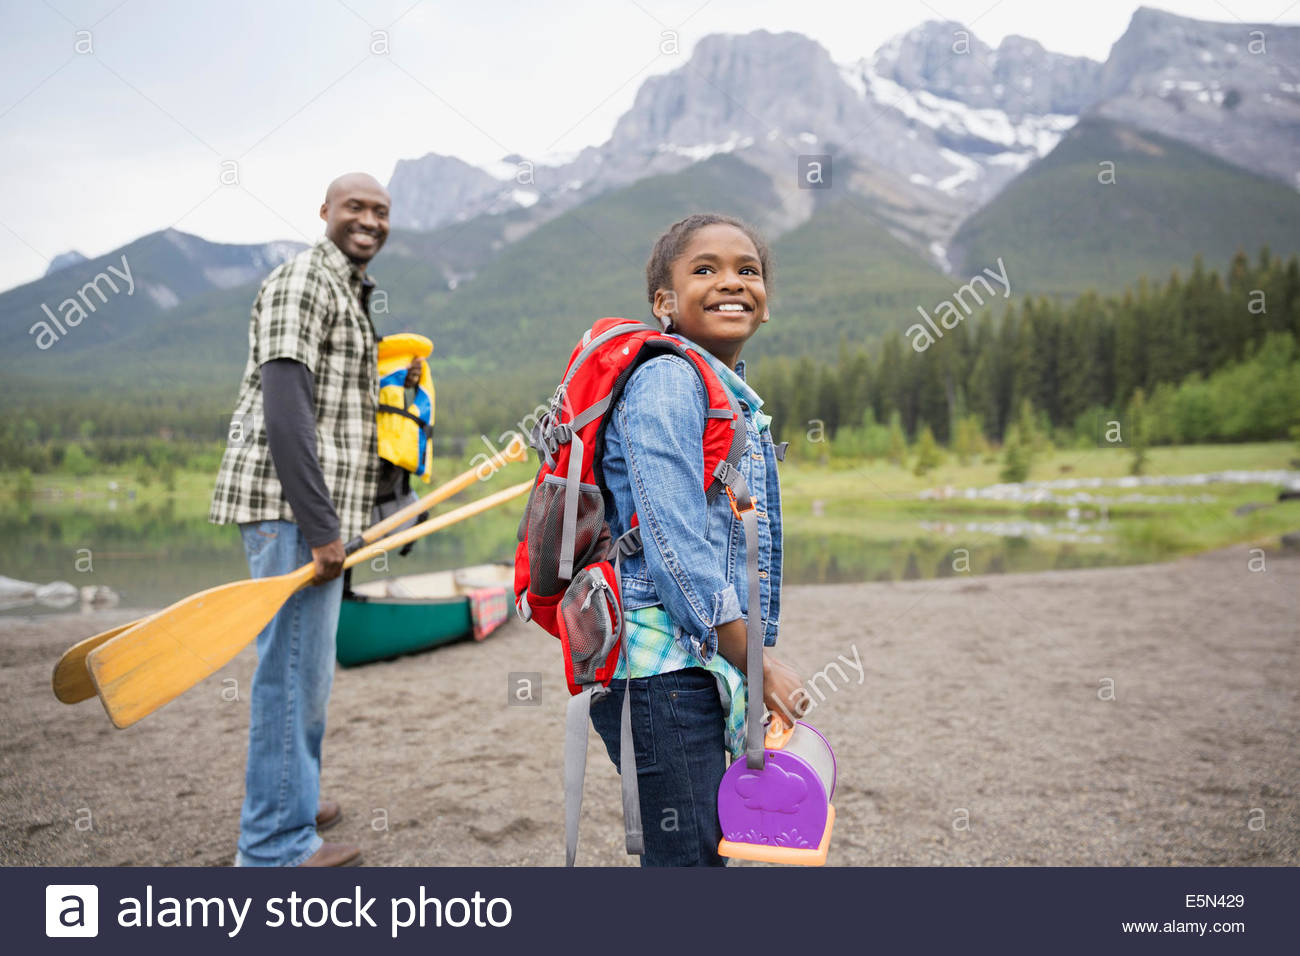 Father and daughter preparing to canoe Stock Photo